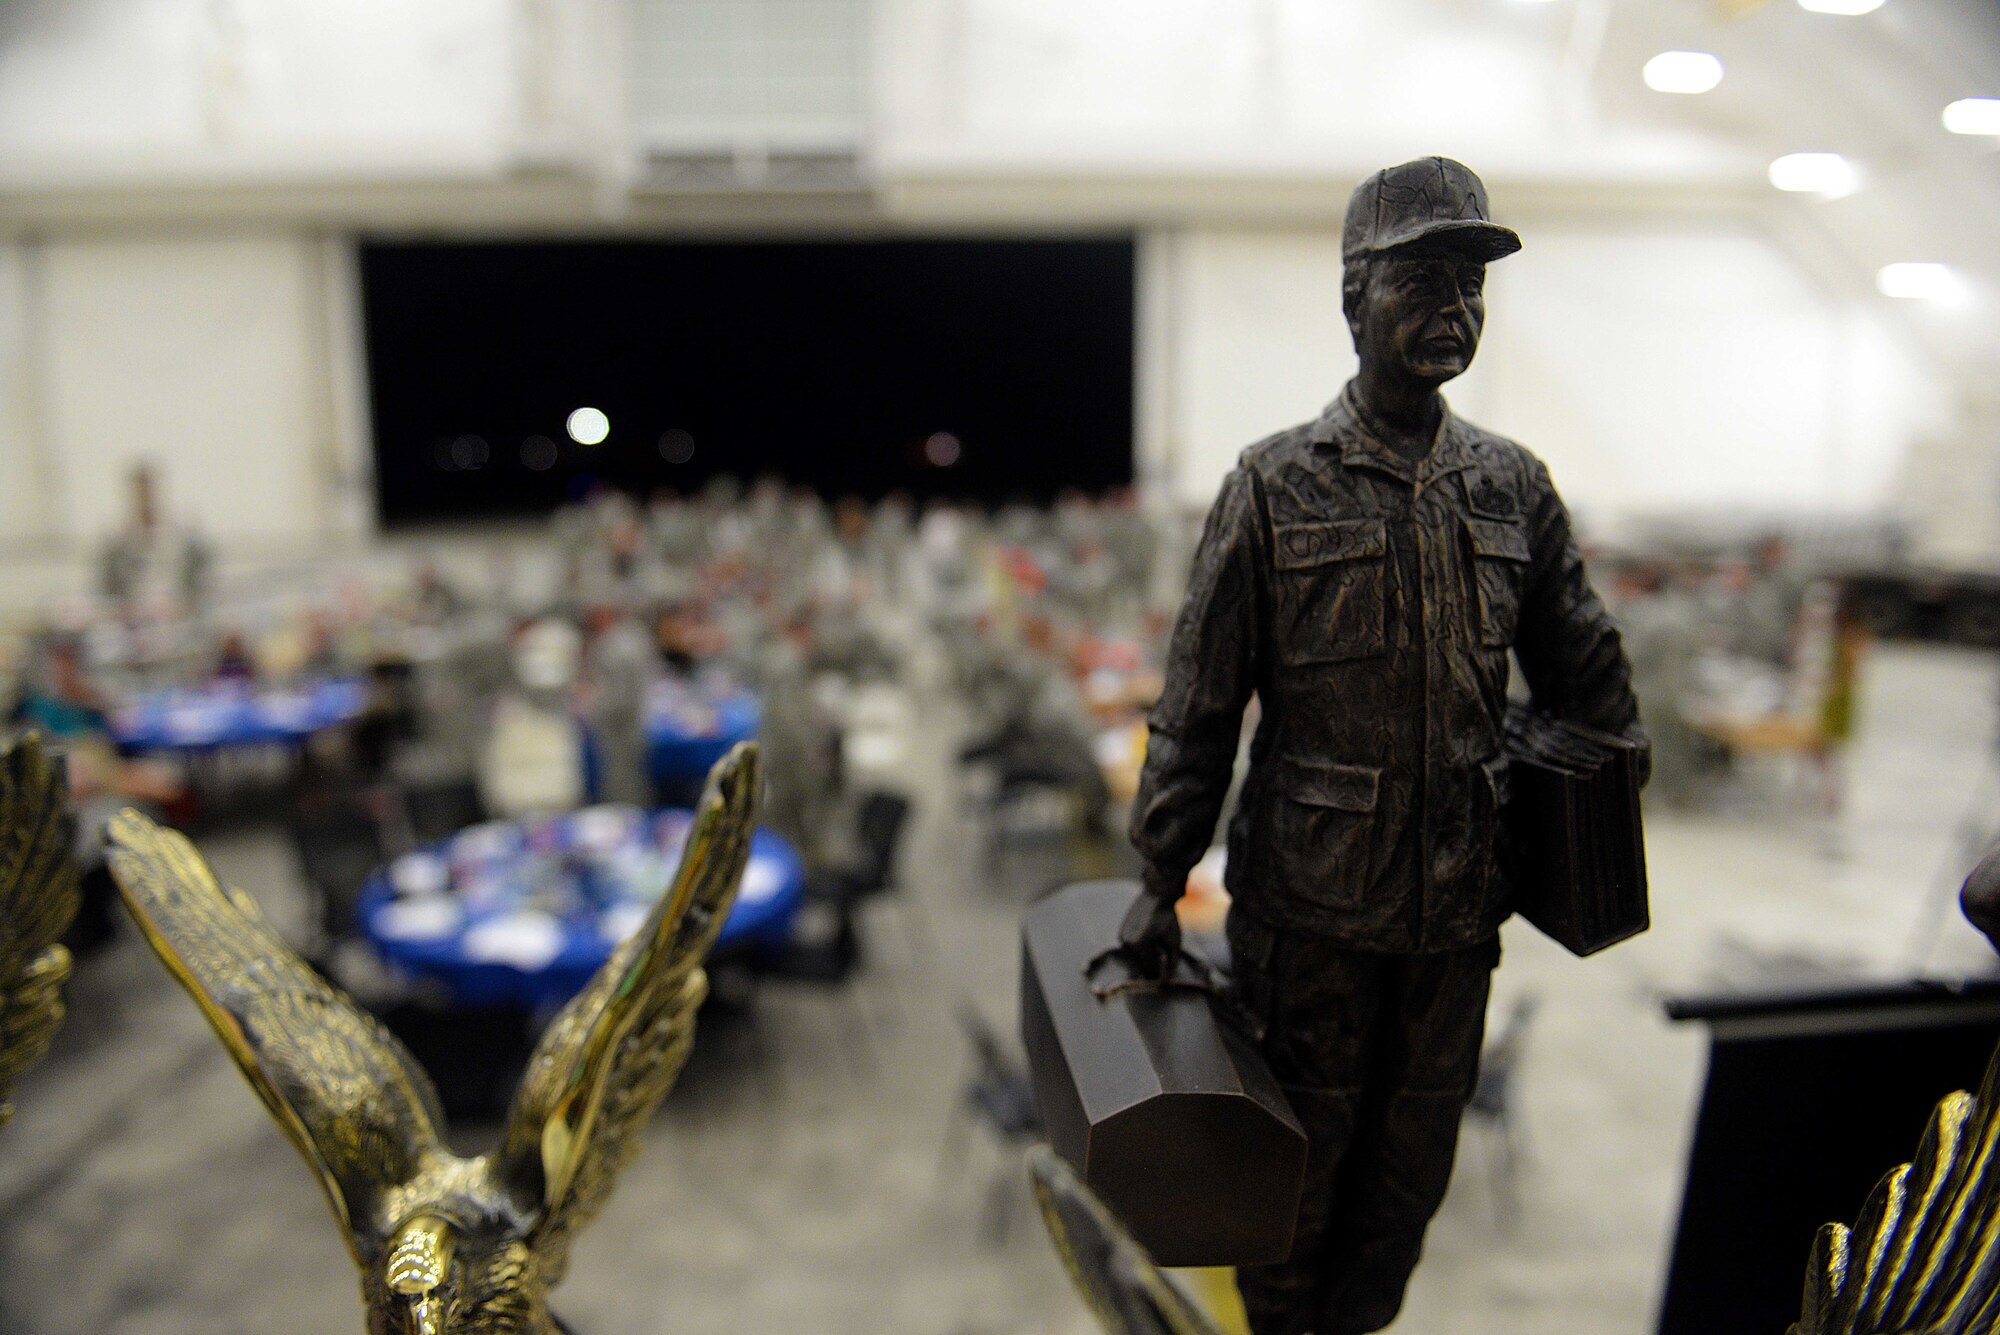 Maintenance Professional of the Year trophies sit prepared before the annual MPOY ceremony March 4, 2016, at Andersen Air Force Base, Guam. The MPOY awards recognized Airmen from multiple maintenance career fields for outstanding achievements. (U.S. Air Force Photo/Airman 1st Class Alexa Ann Henderson)